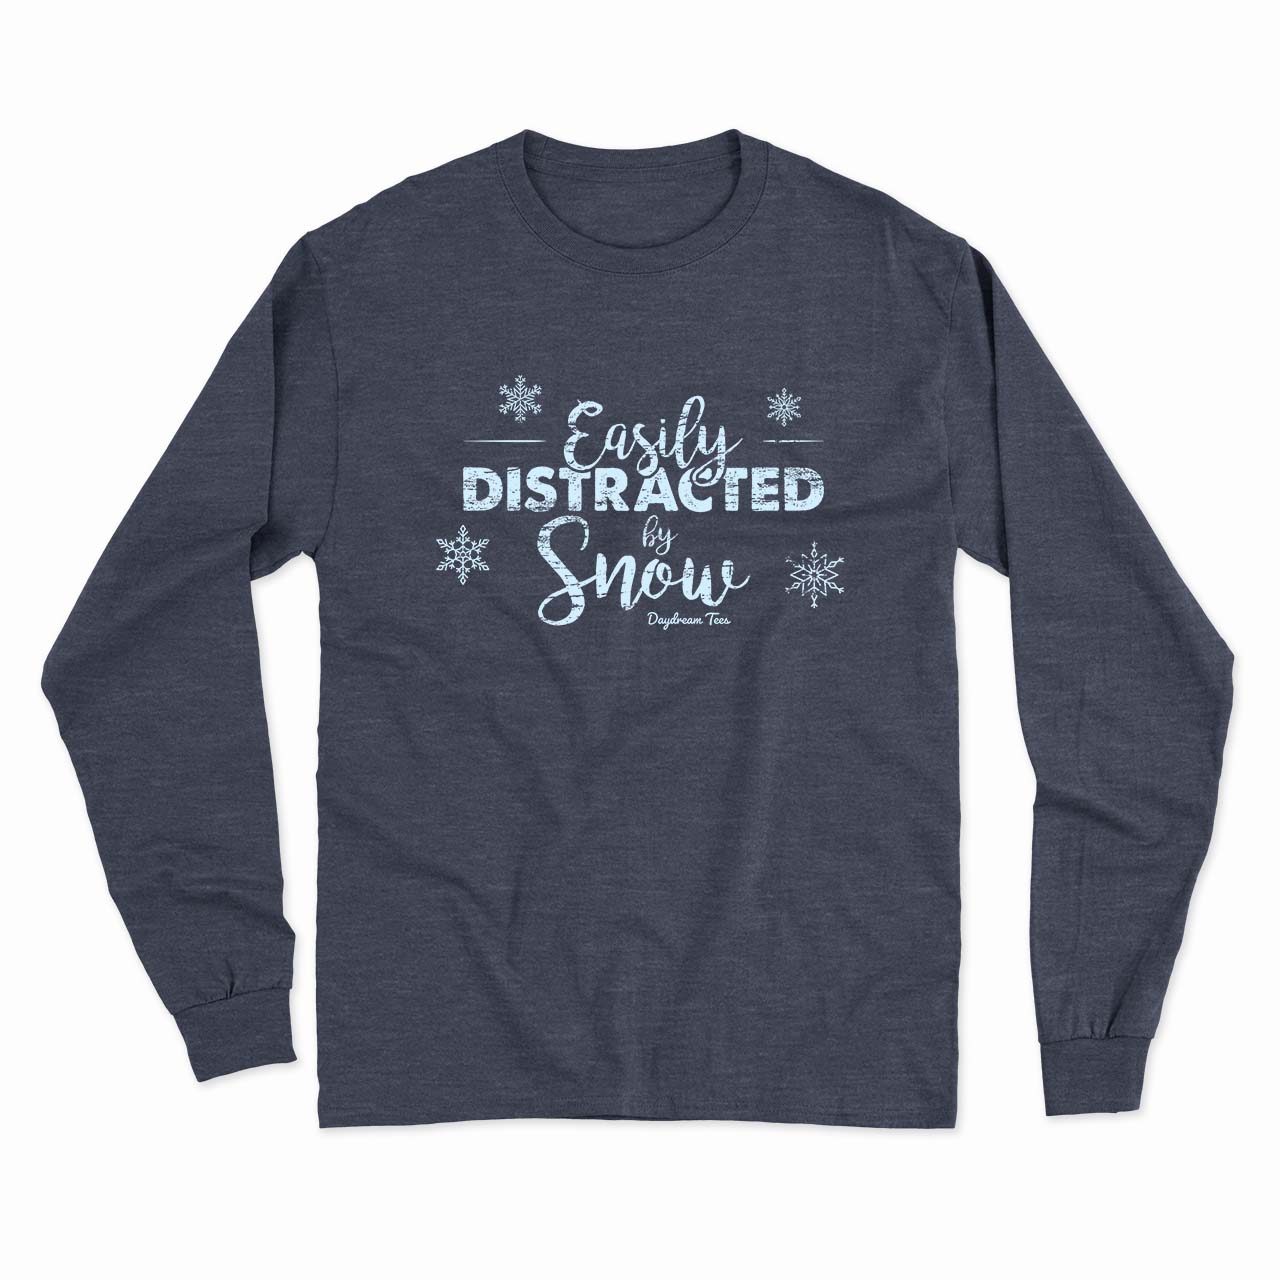 Daydream Tees Easily Distracted by Snow Long Sleeve